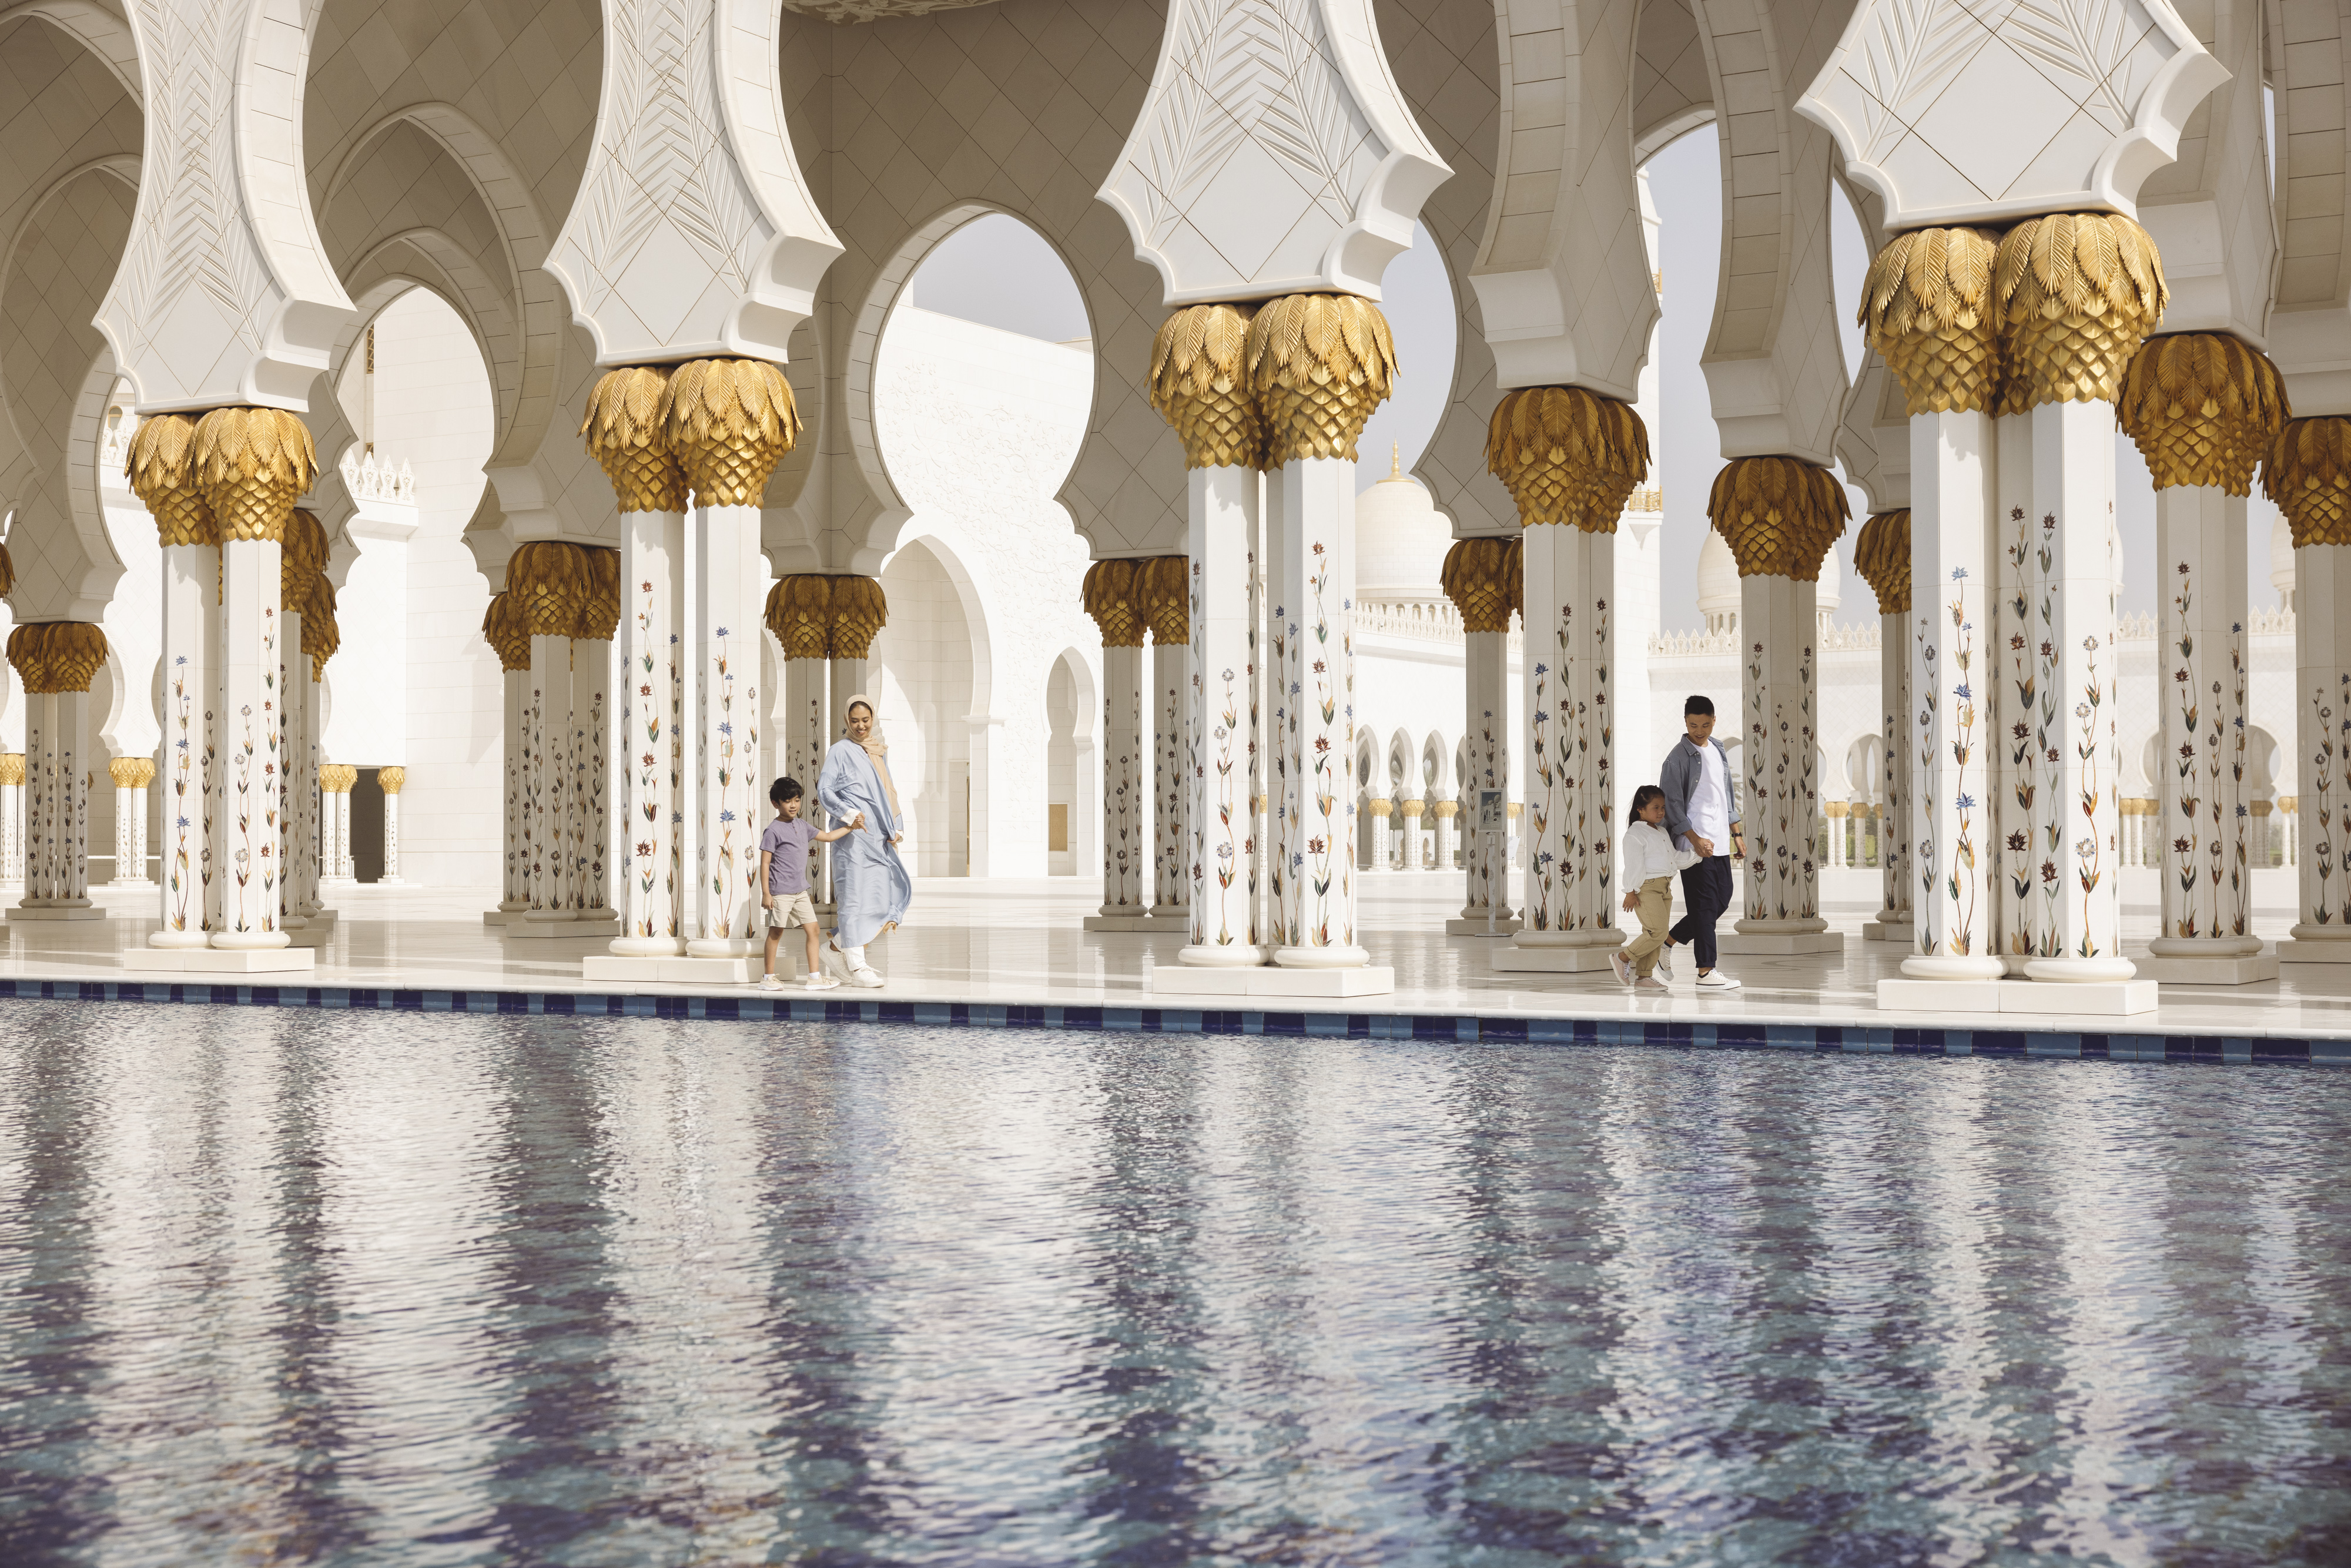 Embrace tranquility at Sheikh Zayed Grand Mosque